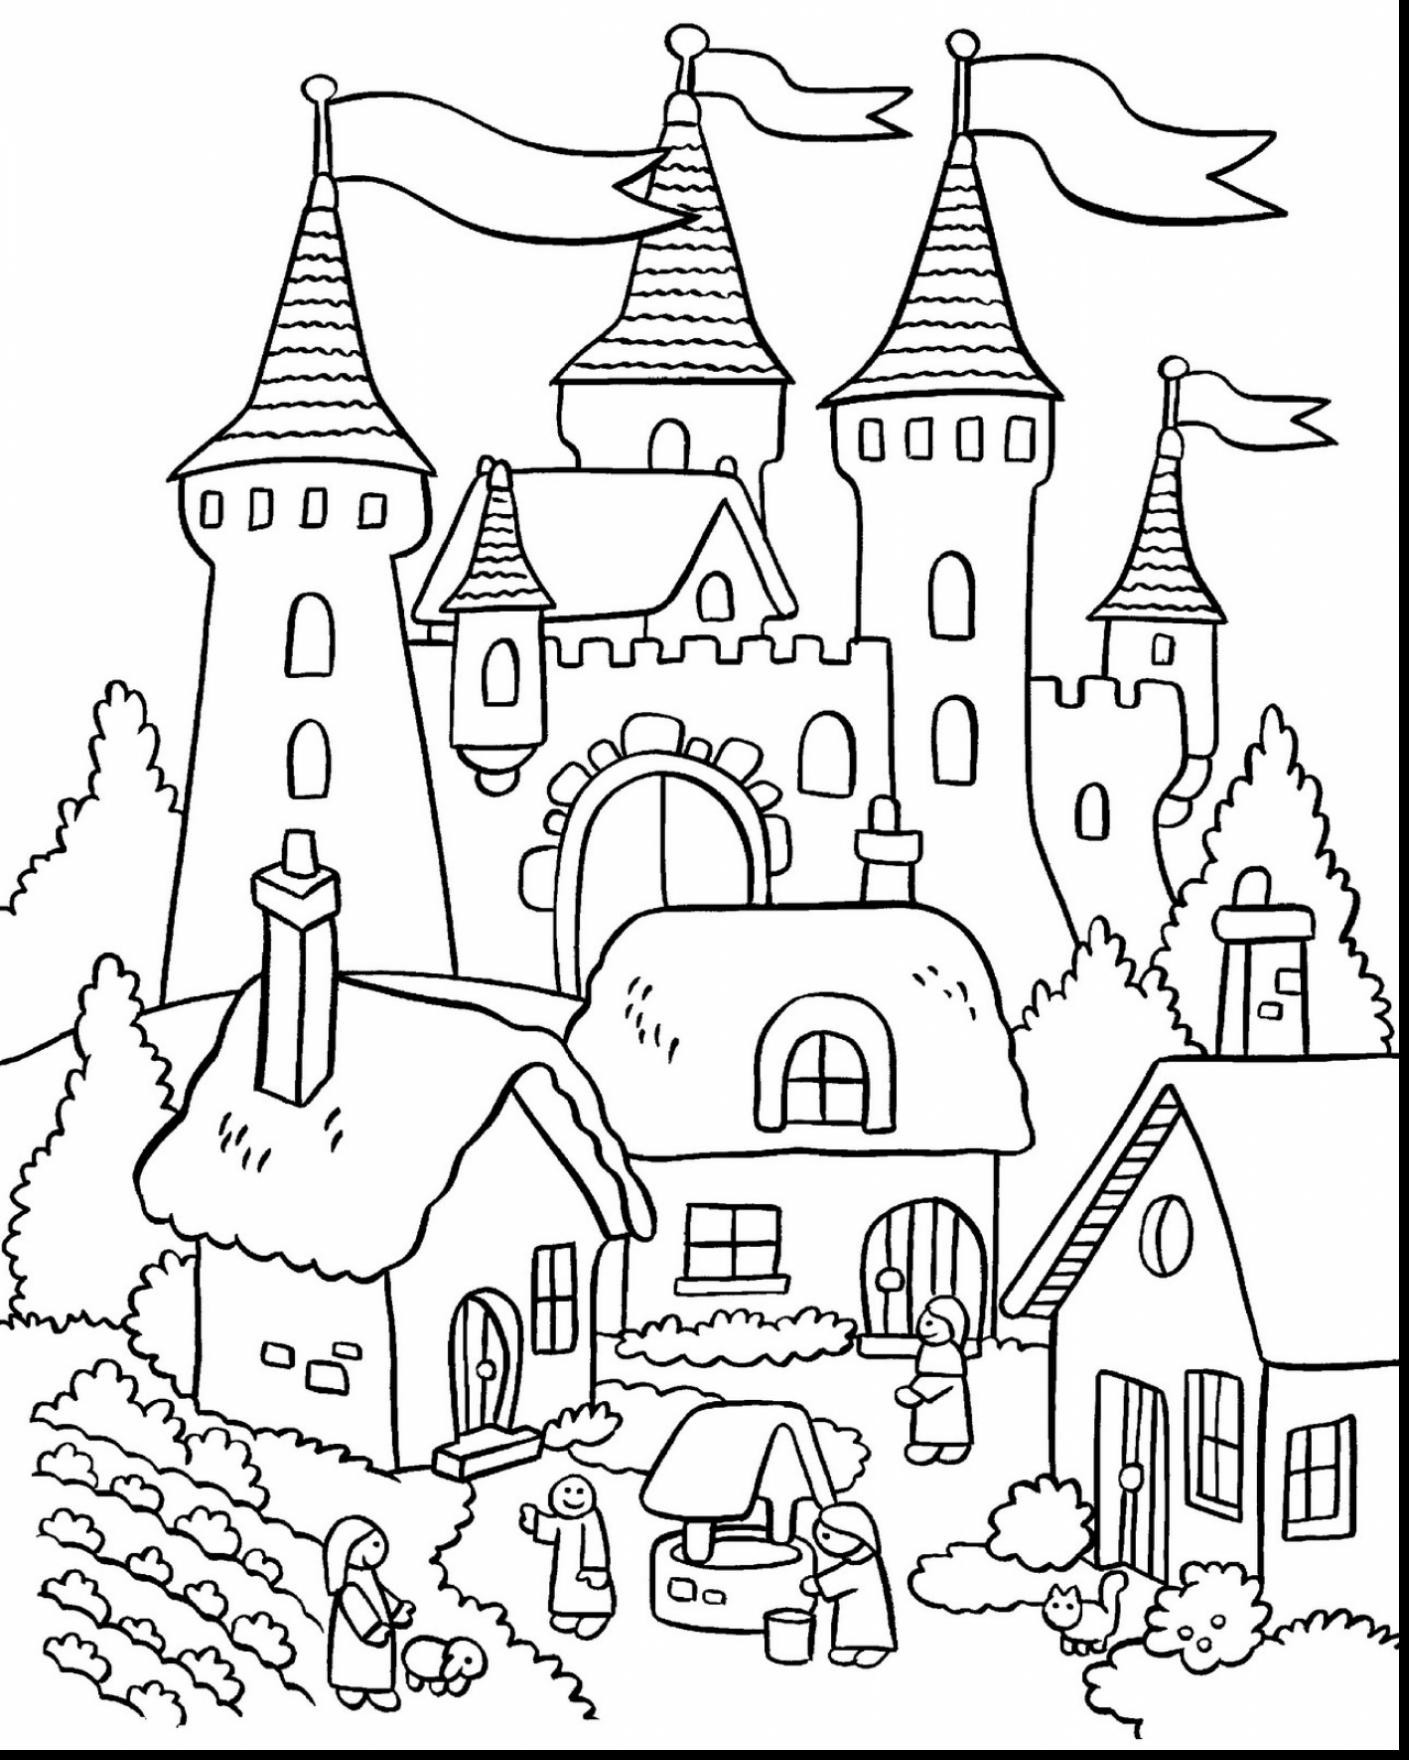 Disney Princess Castle Coloring Pages At Getcolorings.com | Free